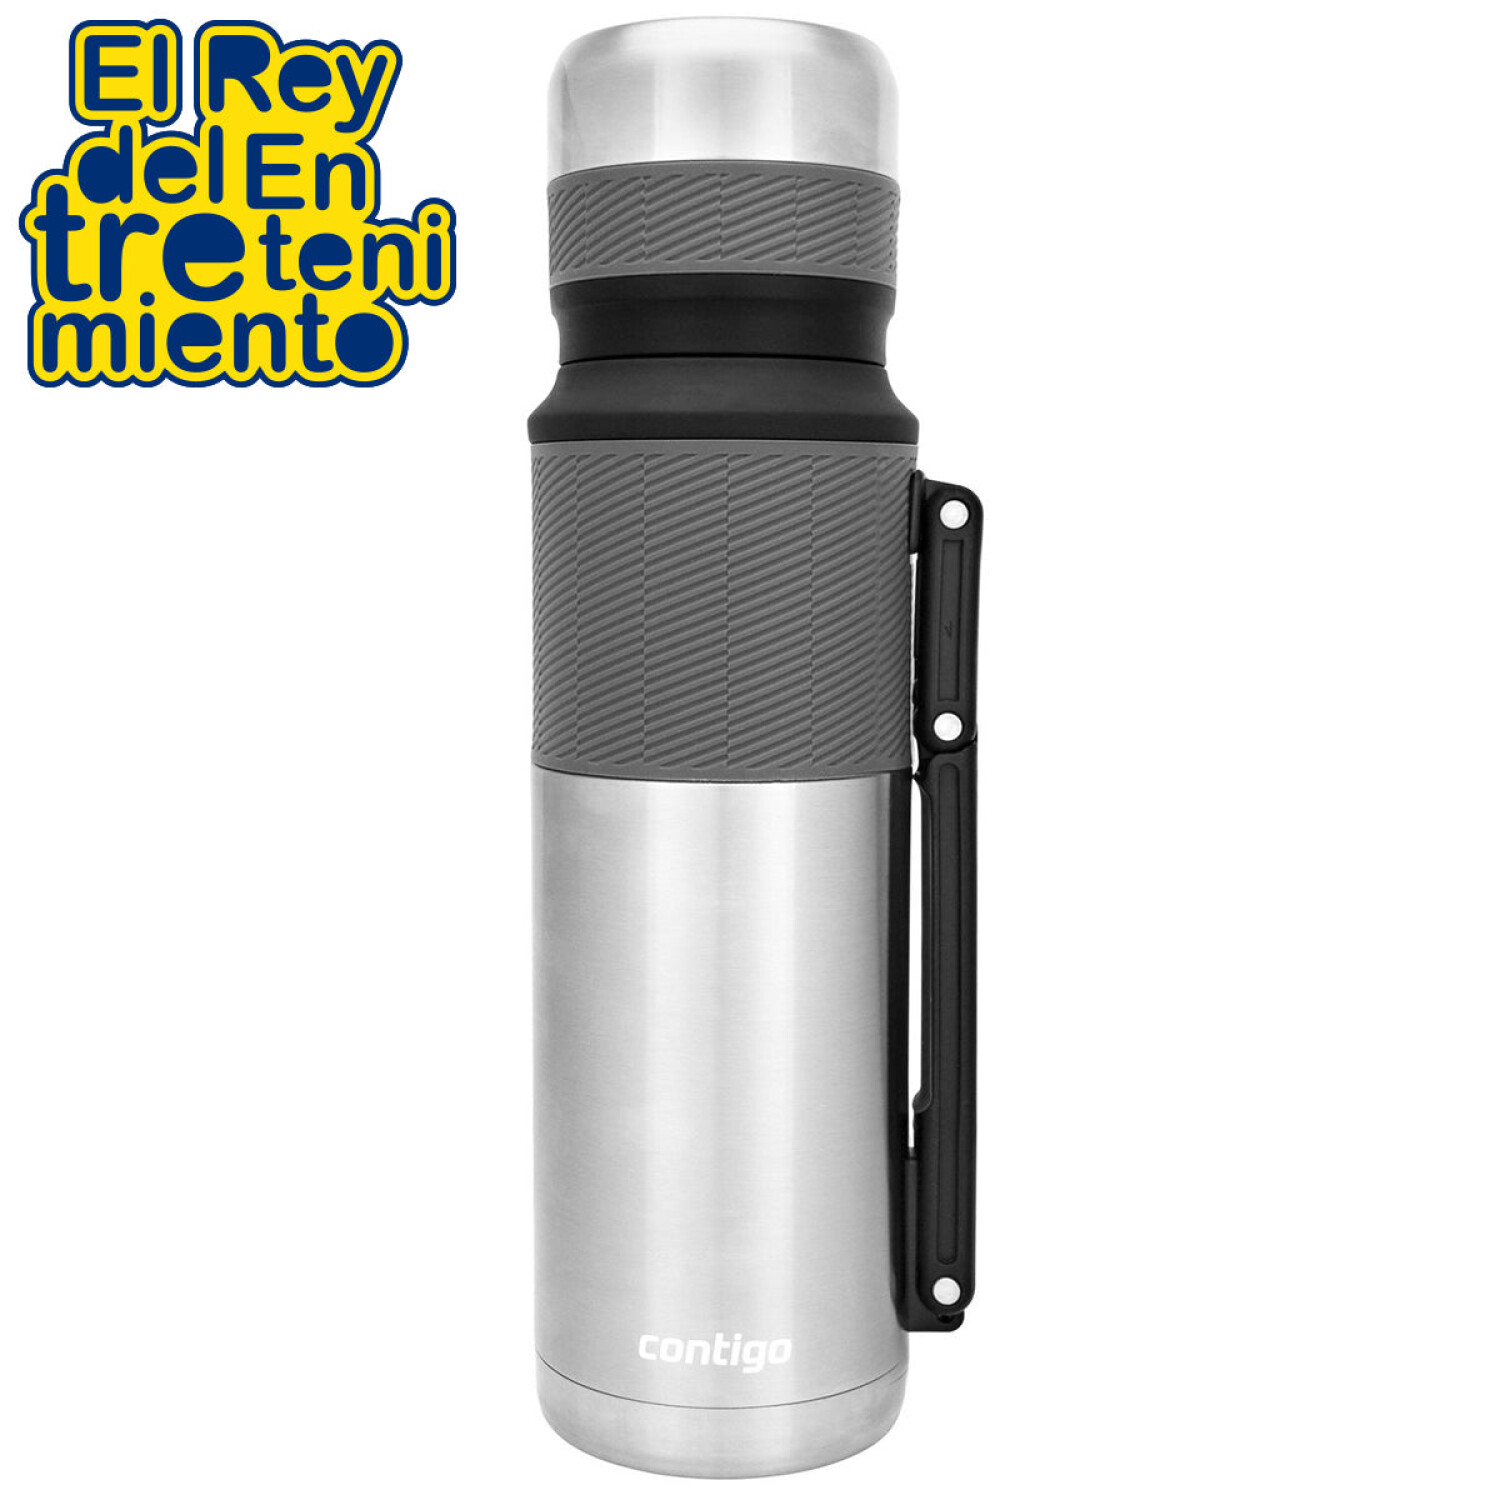 Termo Coleman Acero Inoxidable 1.2lts